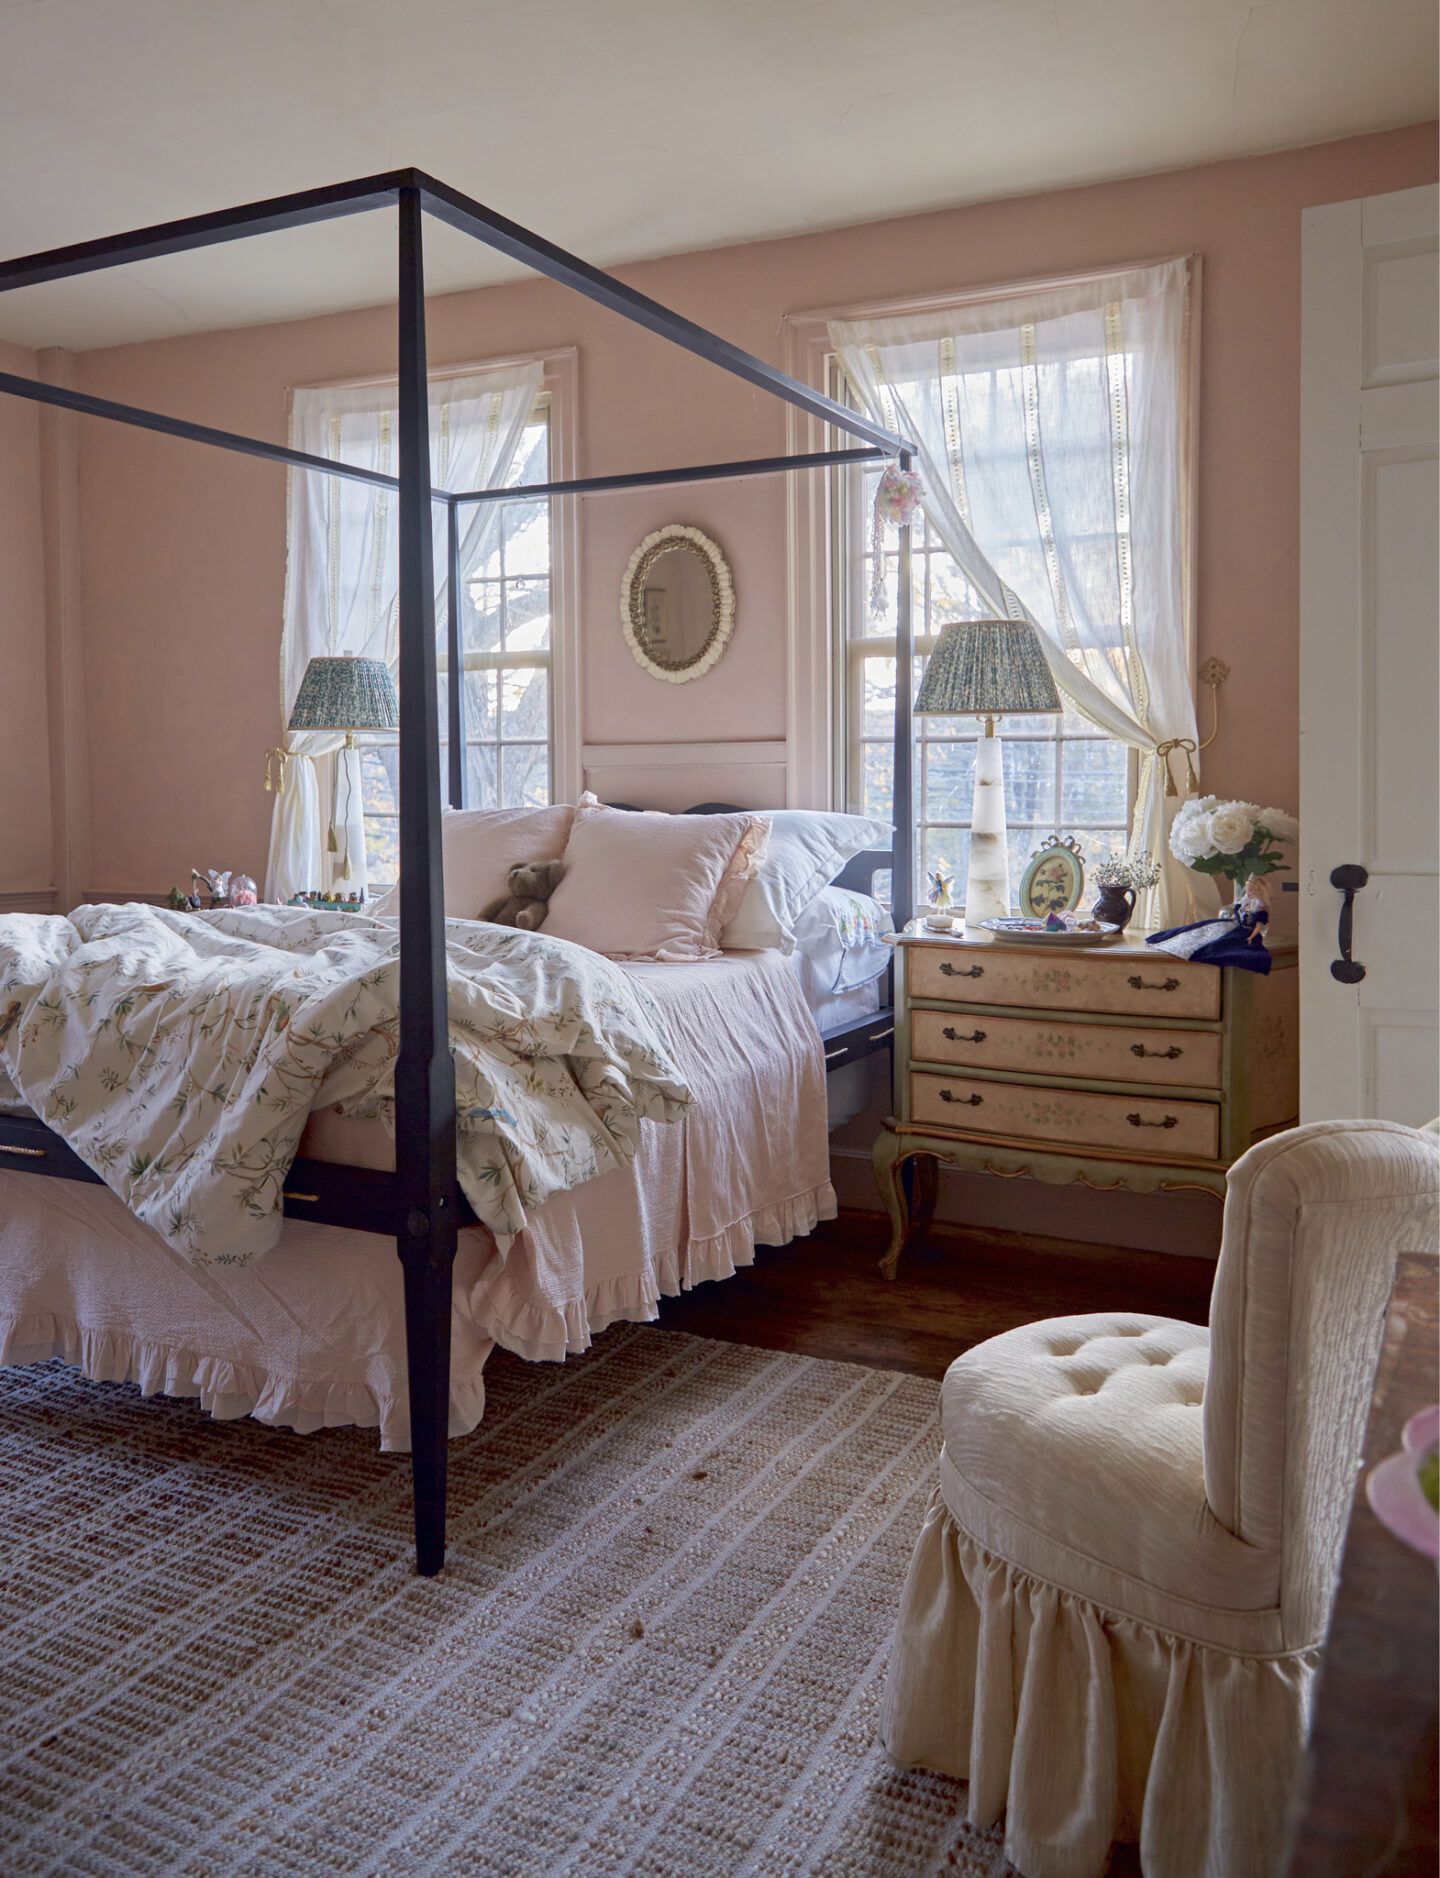 Canopy bed in romantic bedroom in Nora Murphy COUNTRY HOUSE LIVING. #newenglandstyle #americancountry #americanfarmhouse